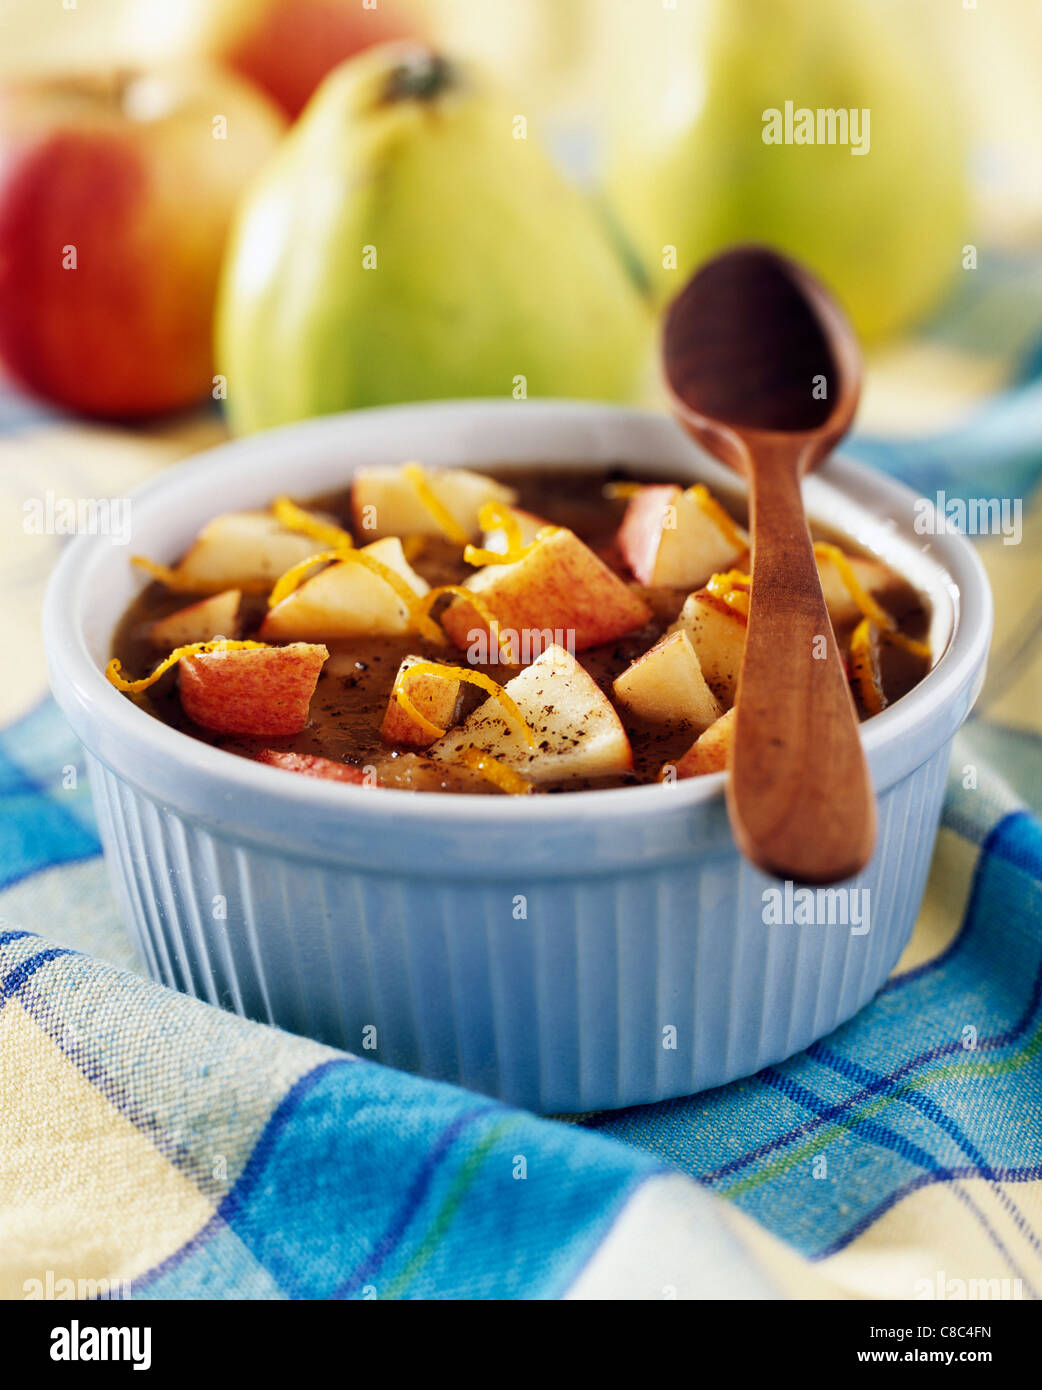 apple and quince marmalade Stock Photo